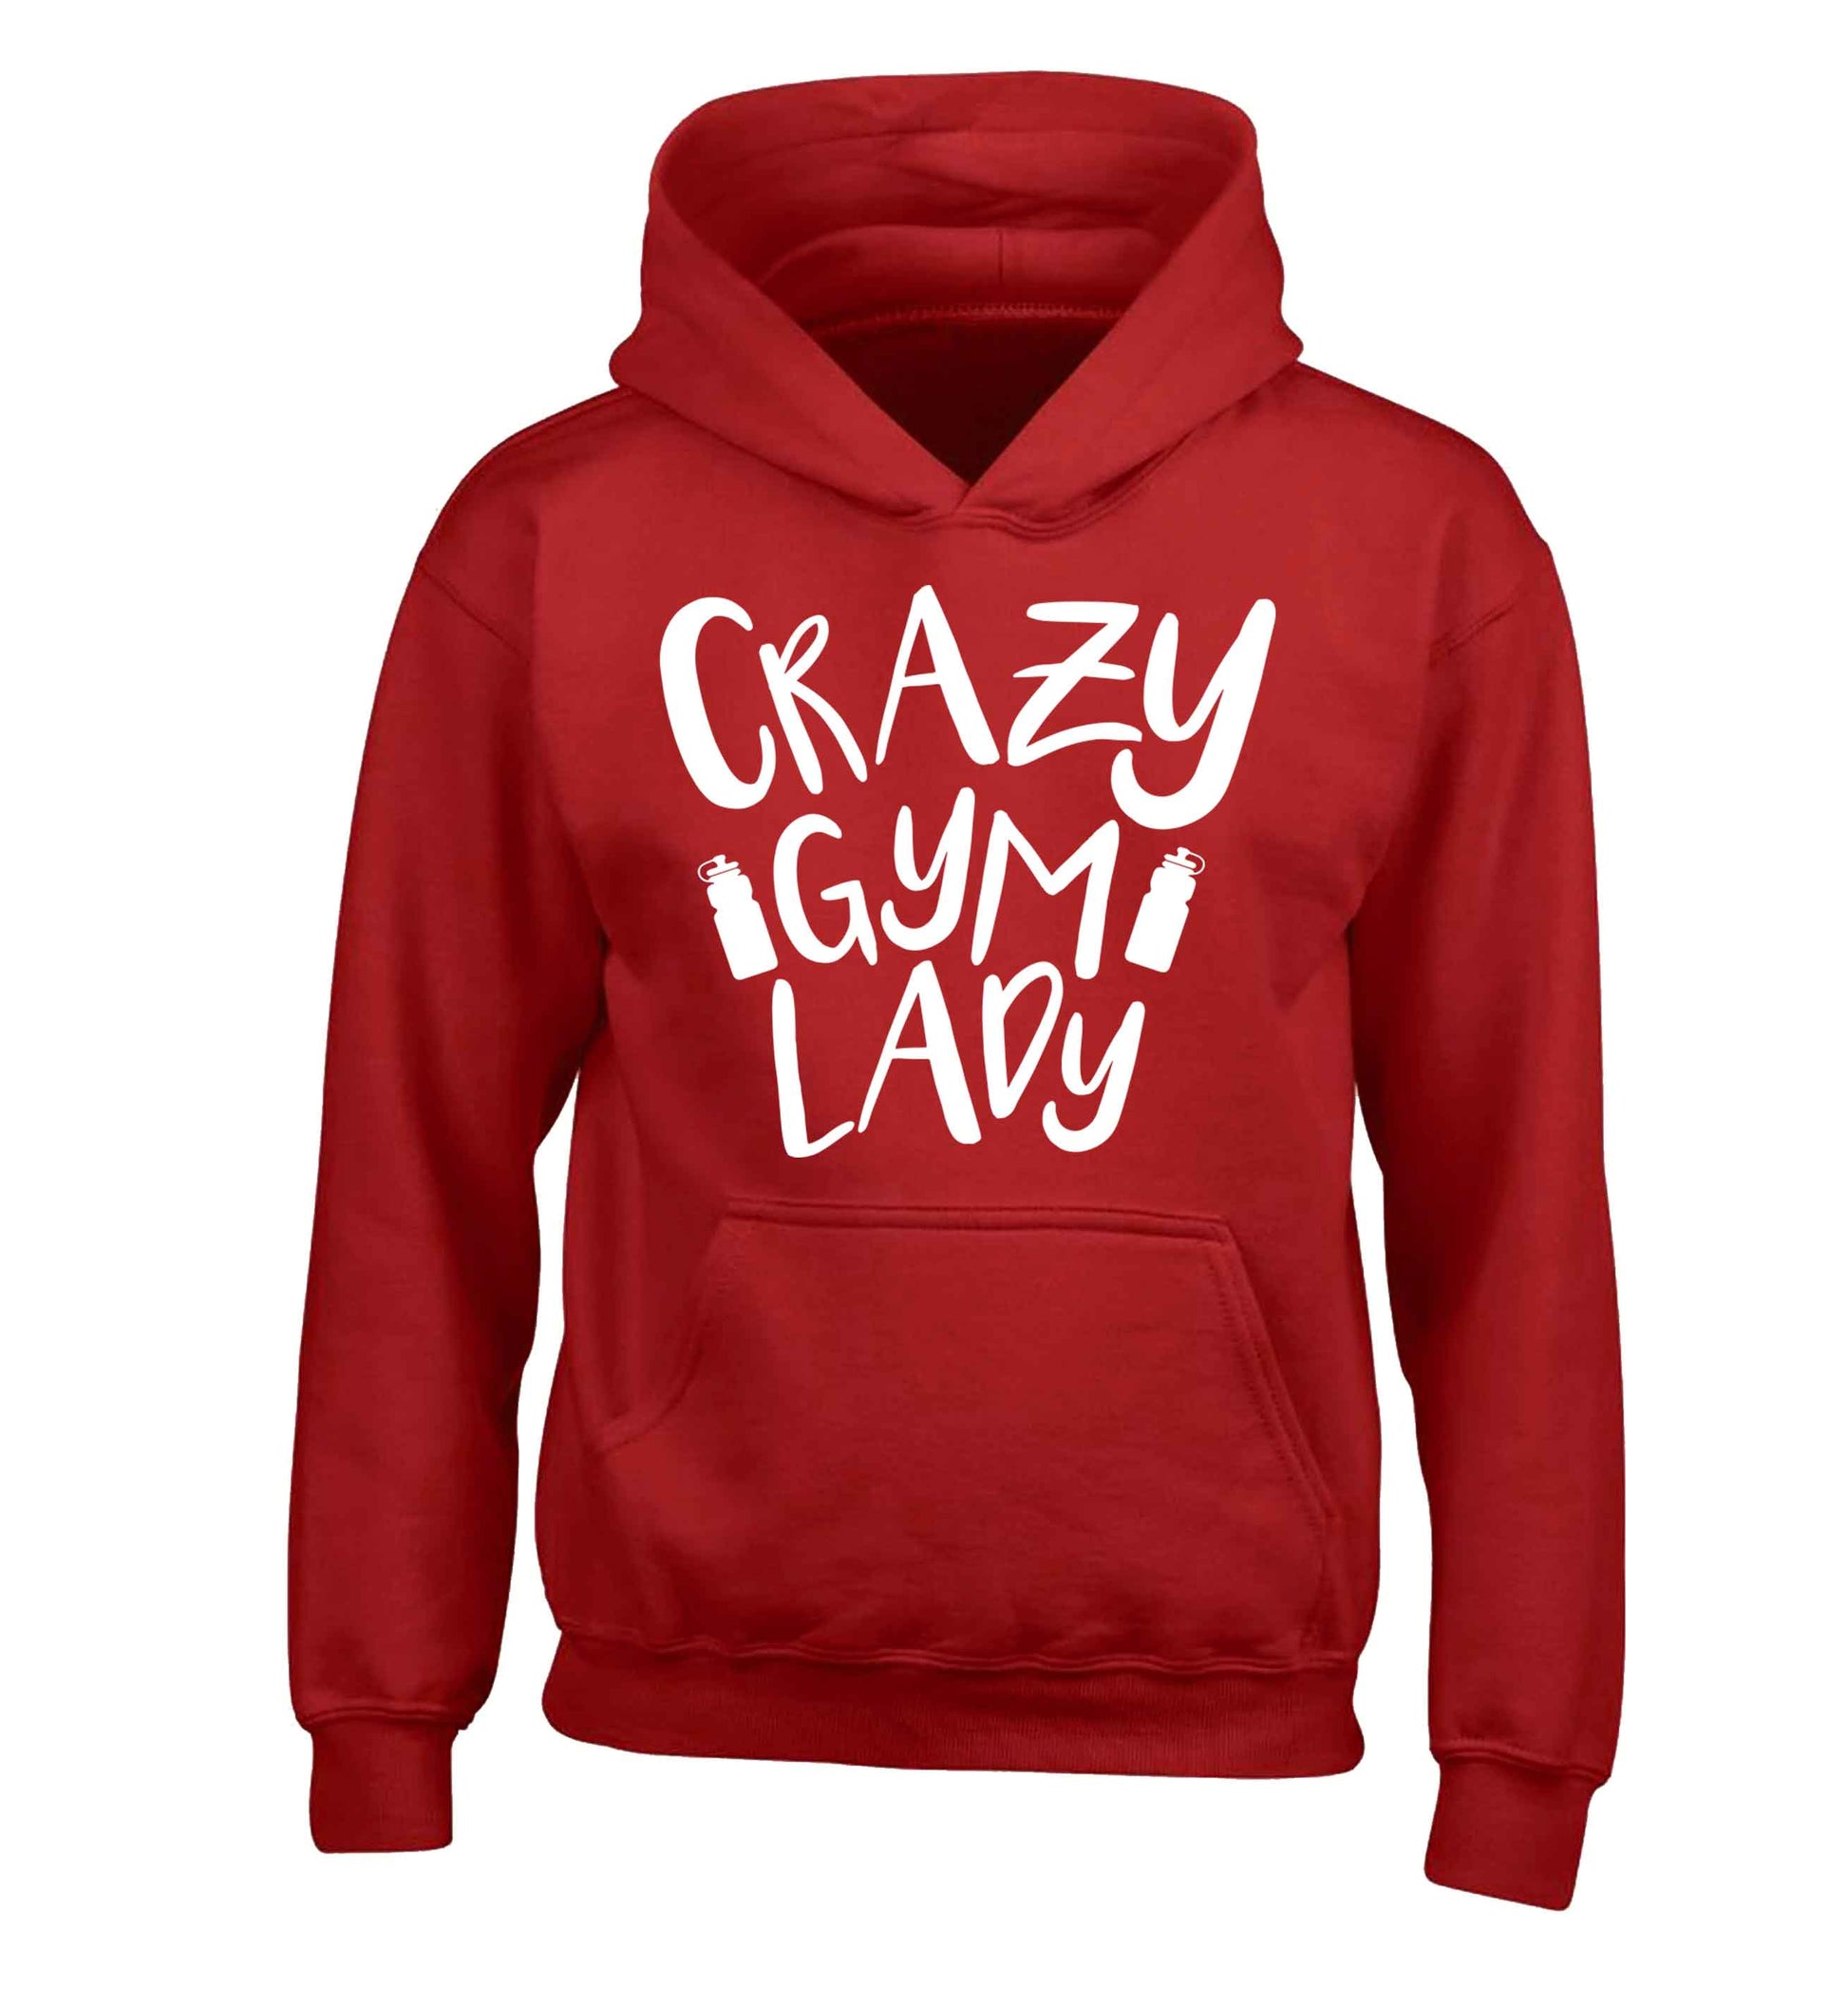 Crazy gym lady children's red hoodie 12-13 Years